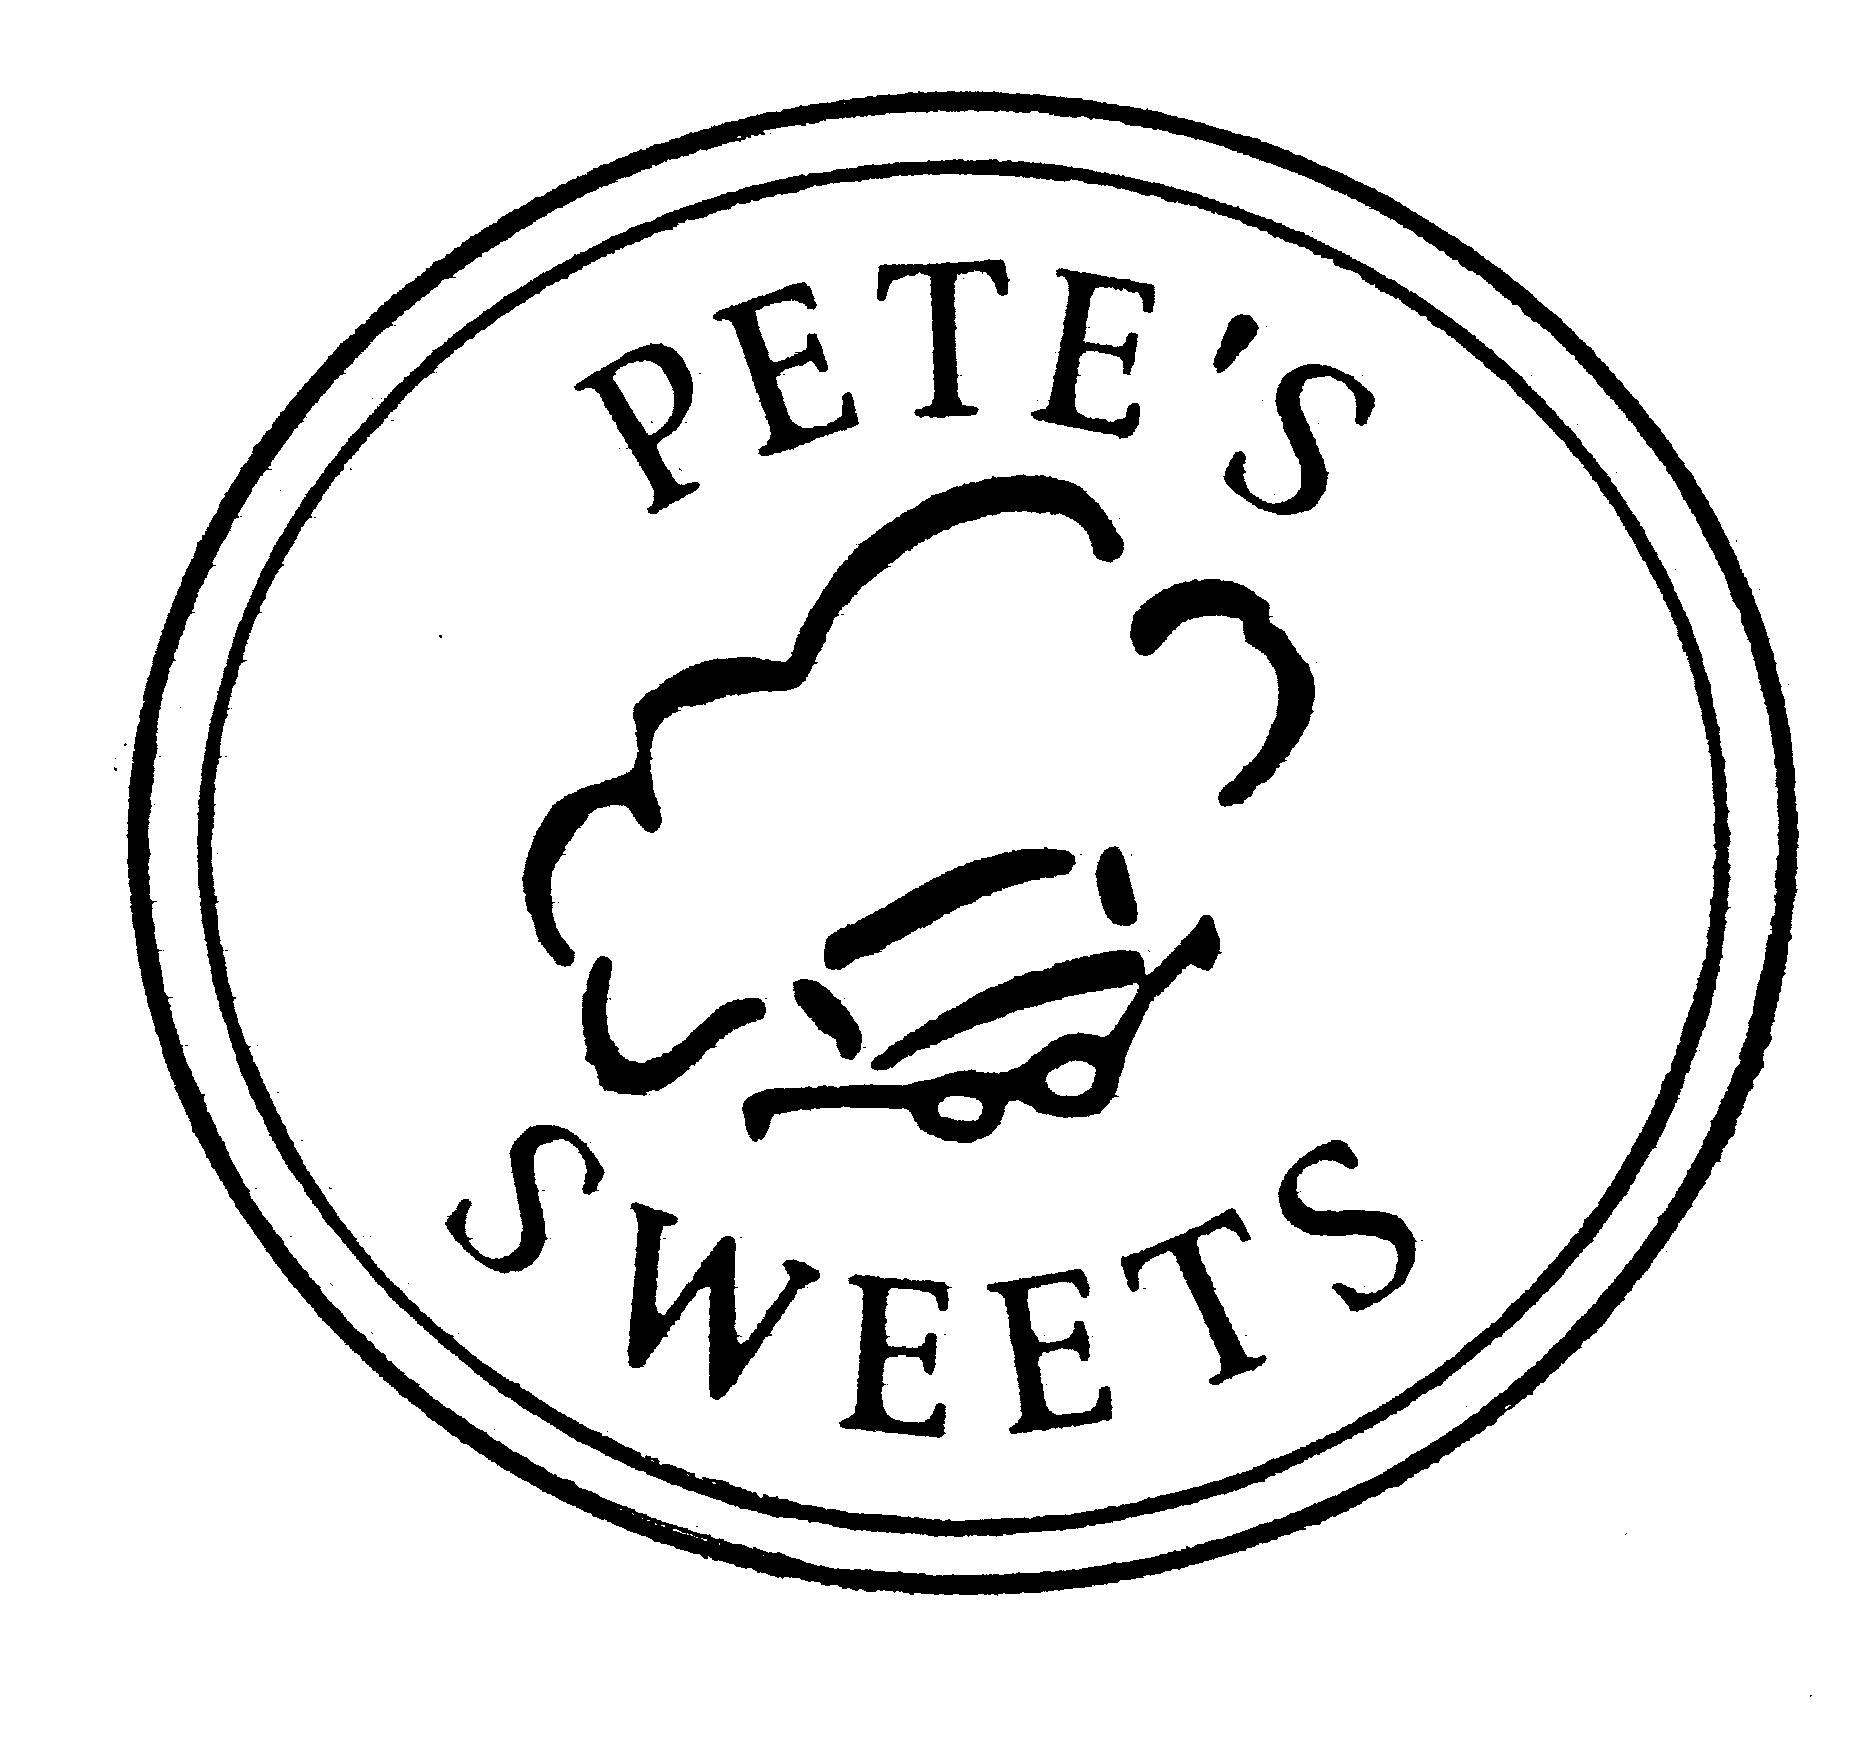  PETE'S SWEETS